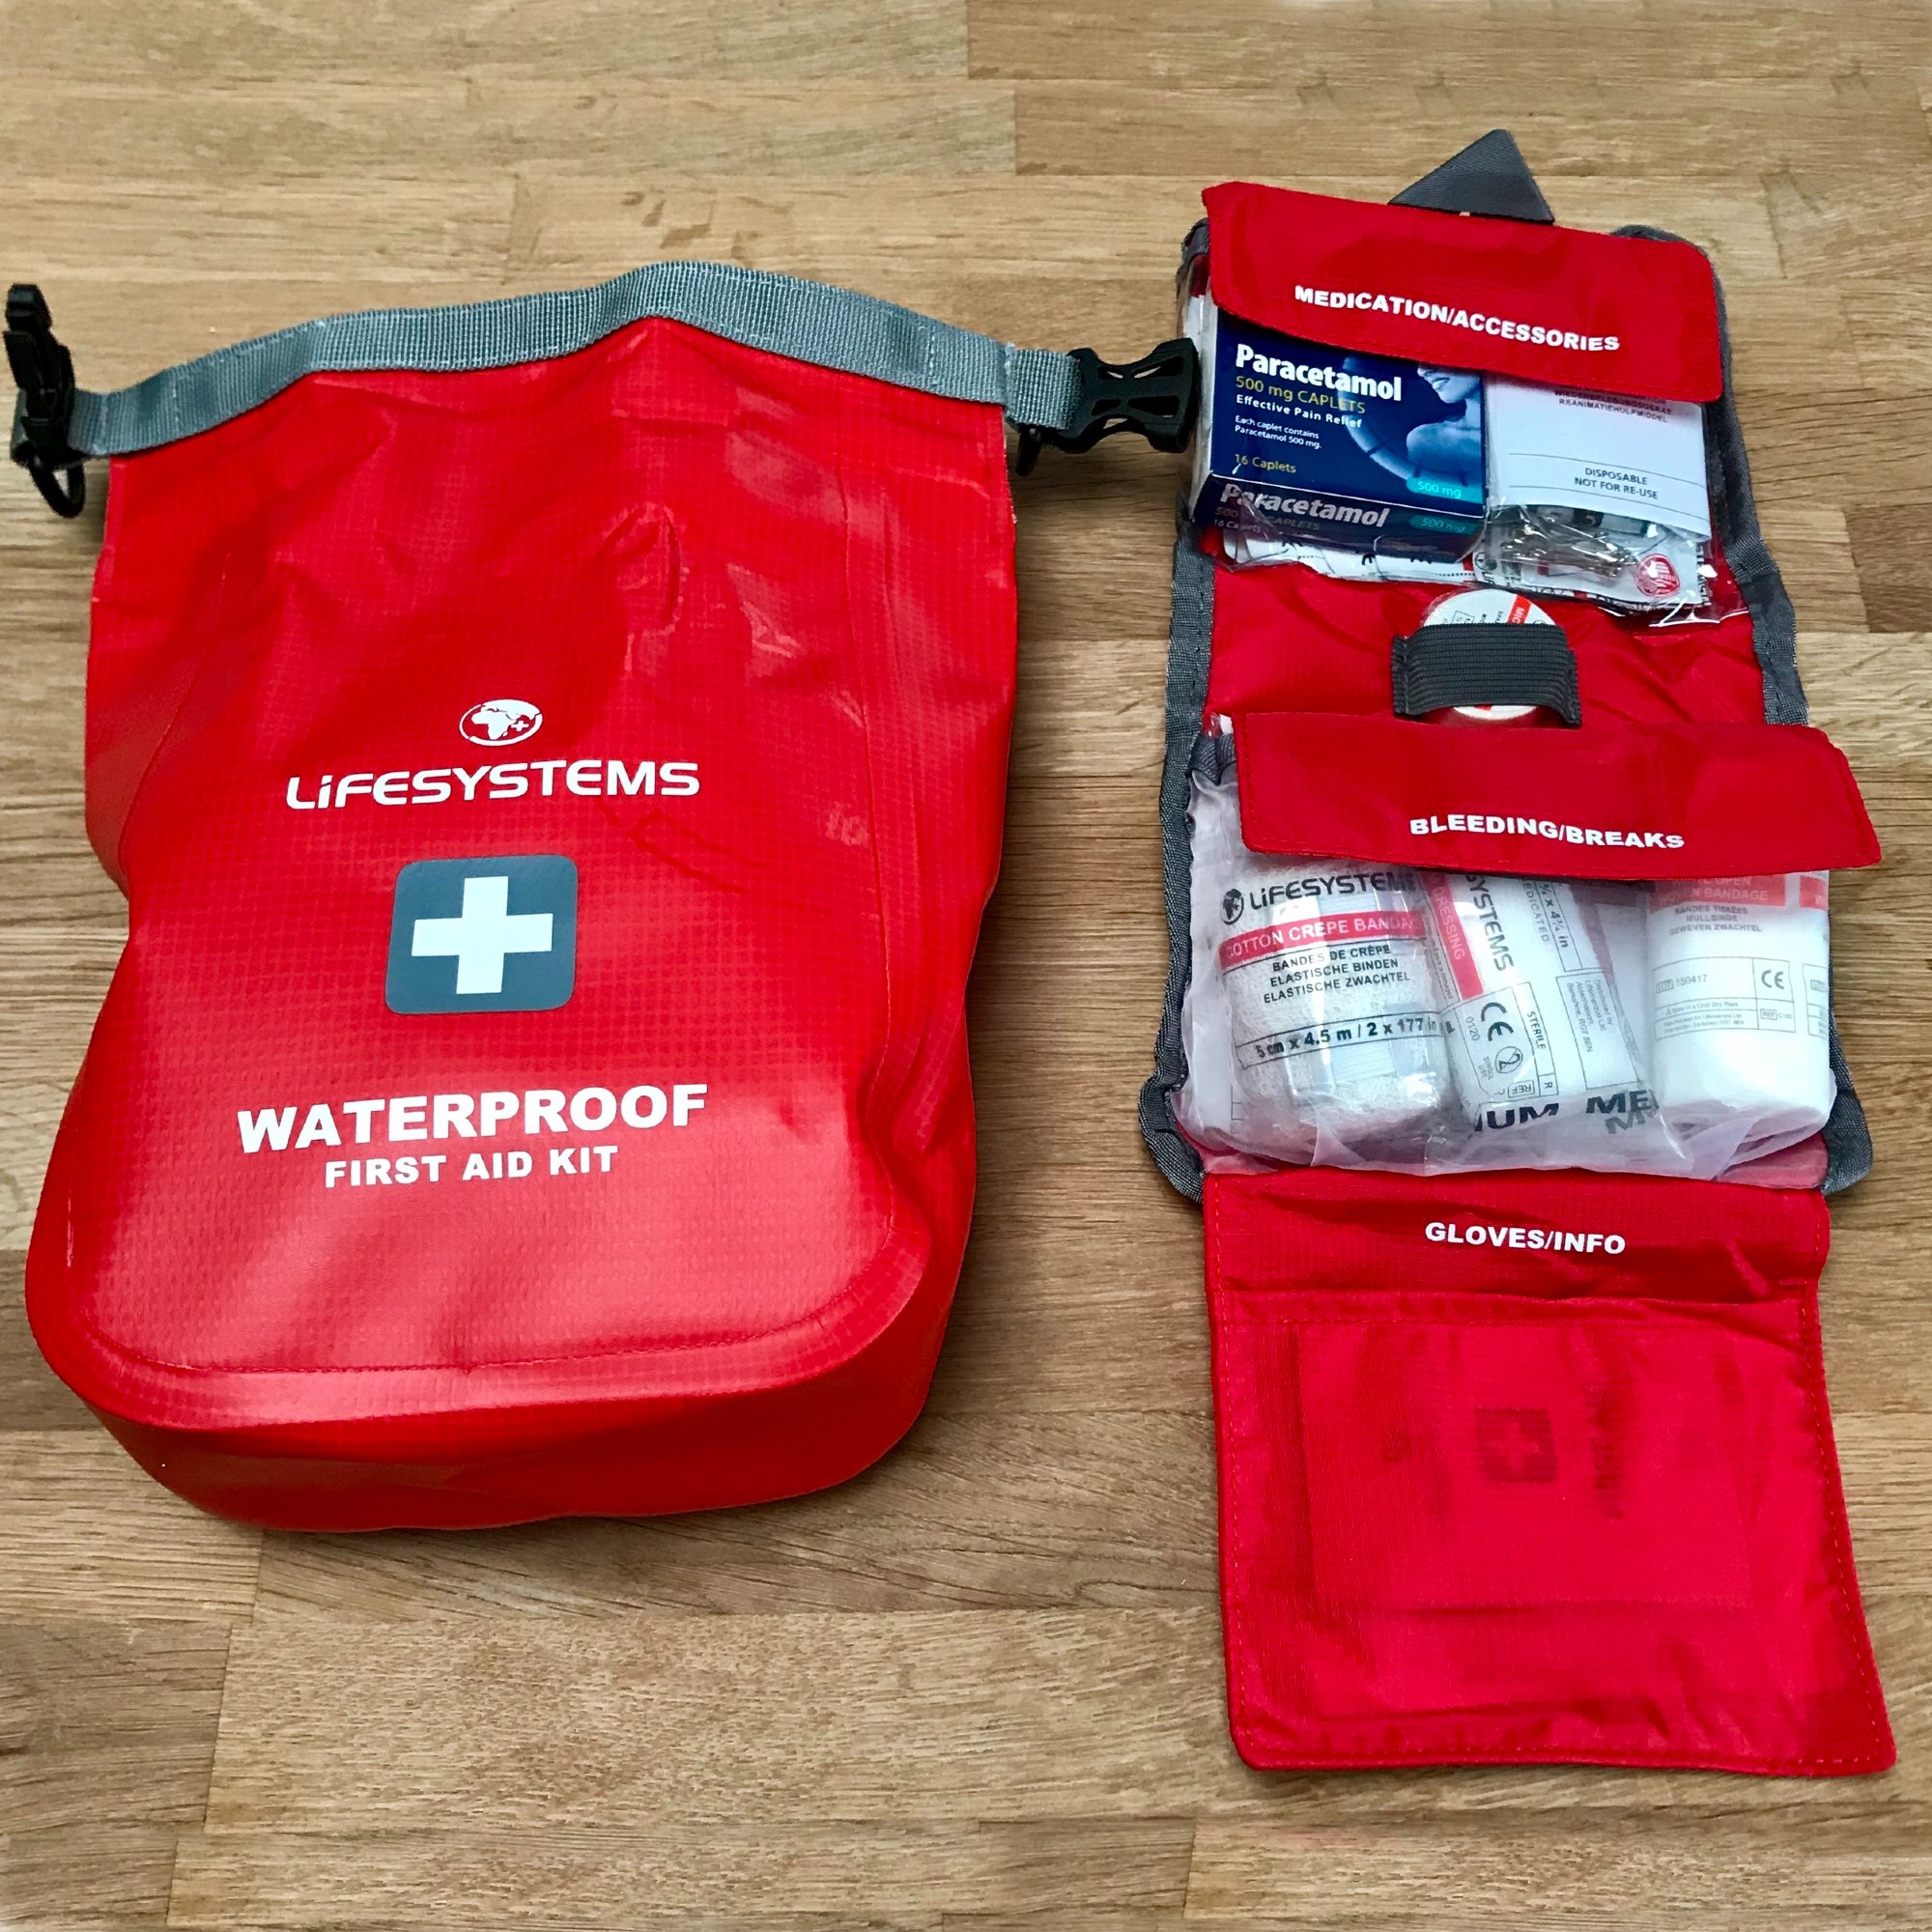 Lifesystems Waterproof Portable First Aid Kit